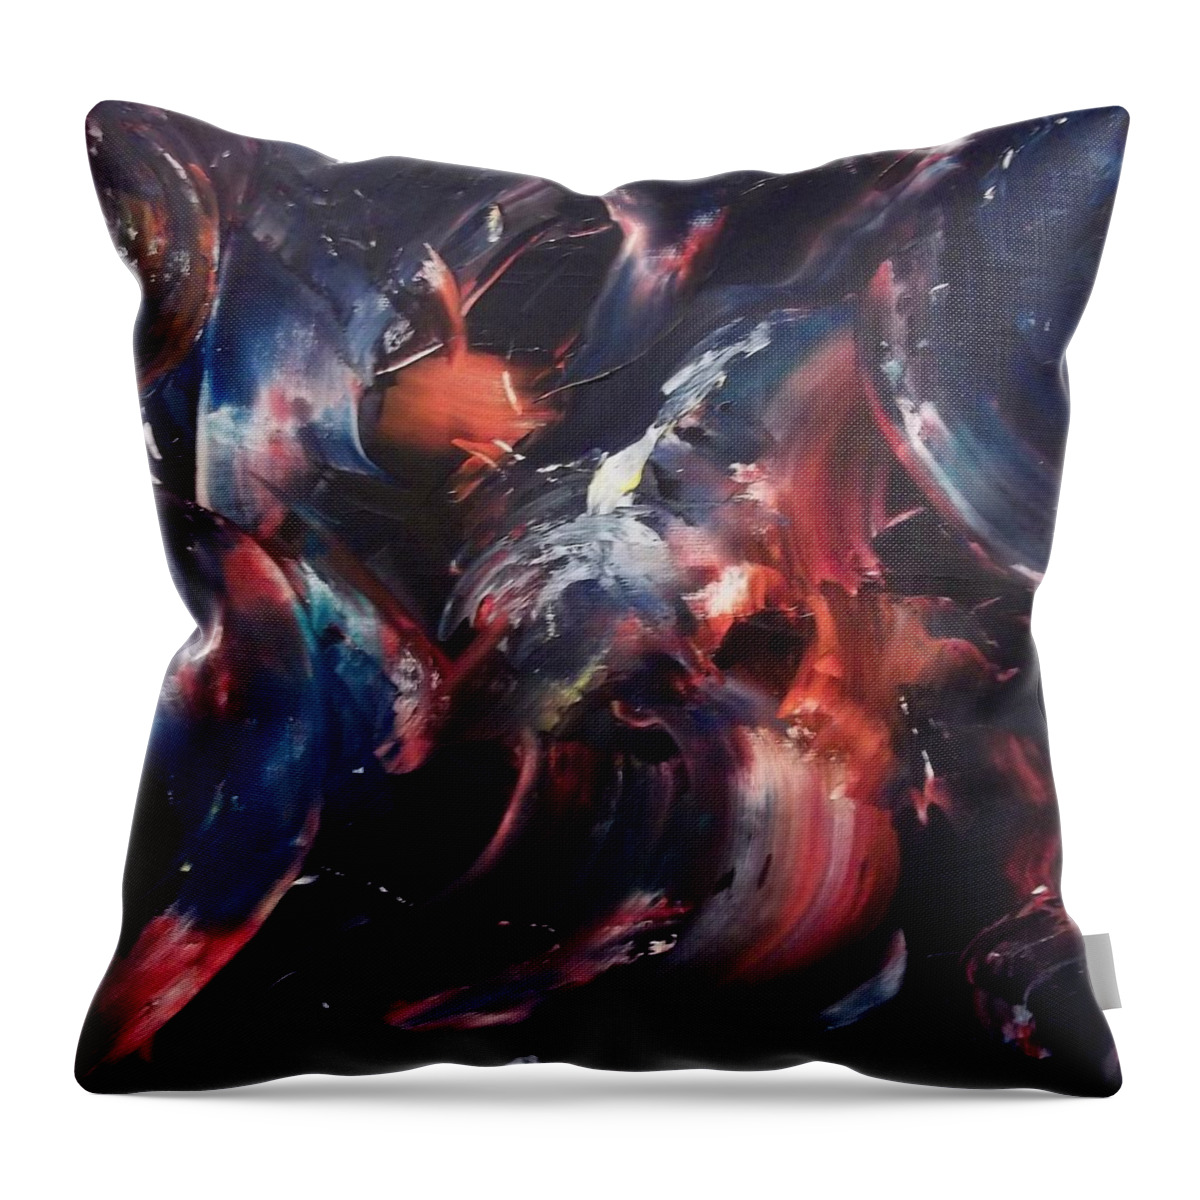 Abstract Throw Pillow featuring the painting The Center by Stephen King